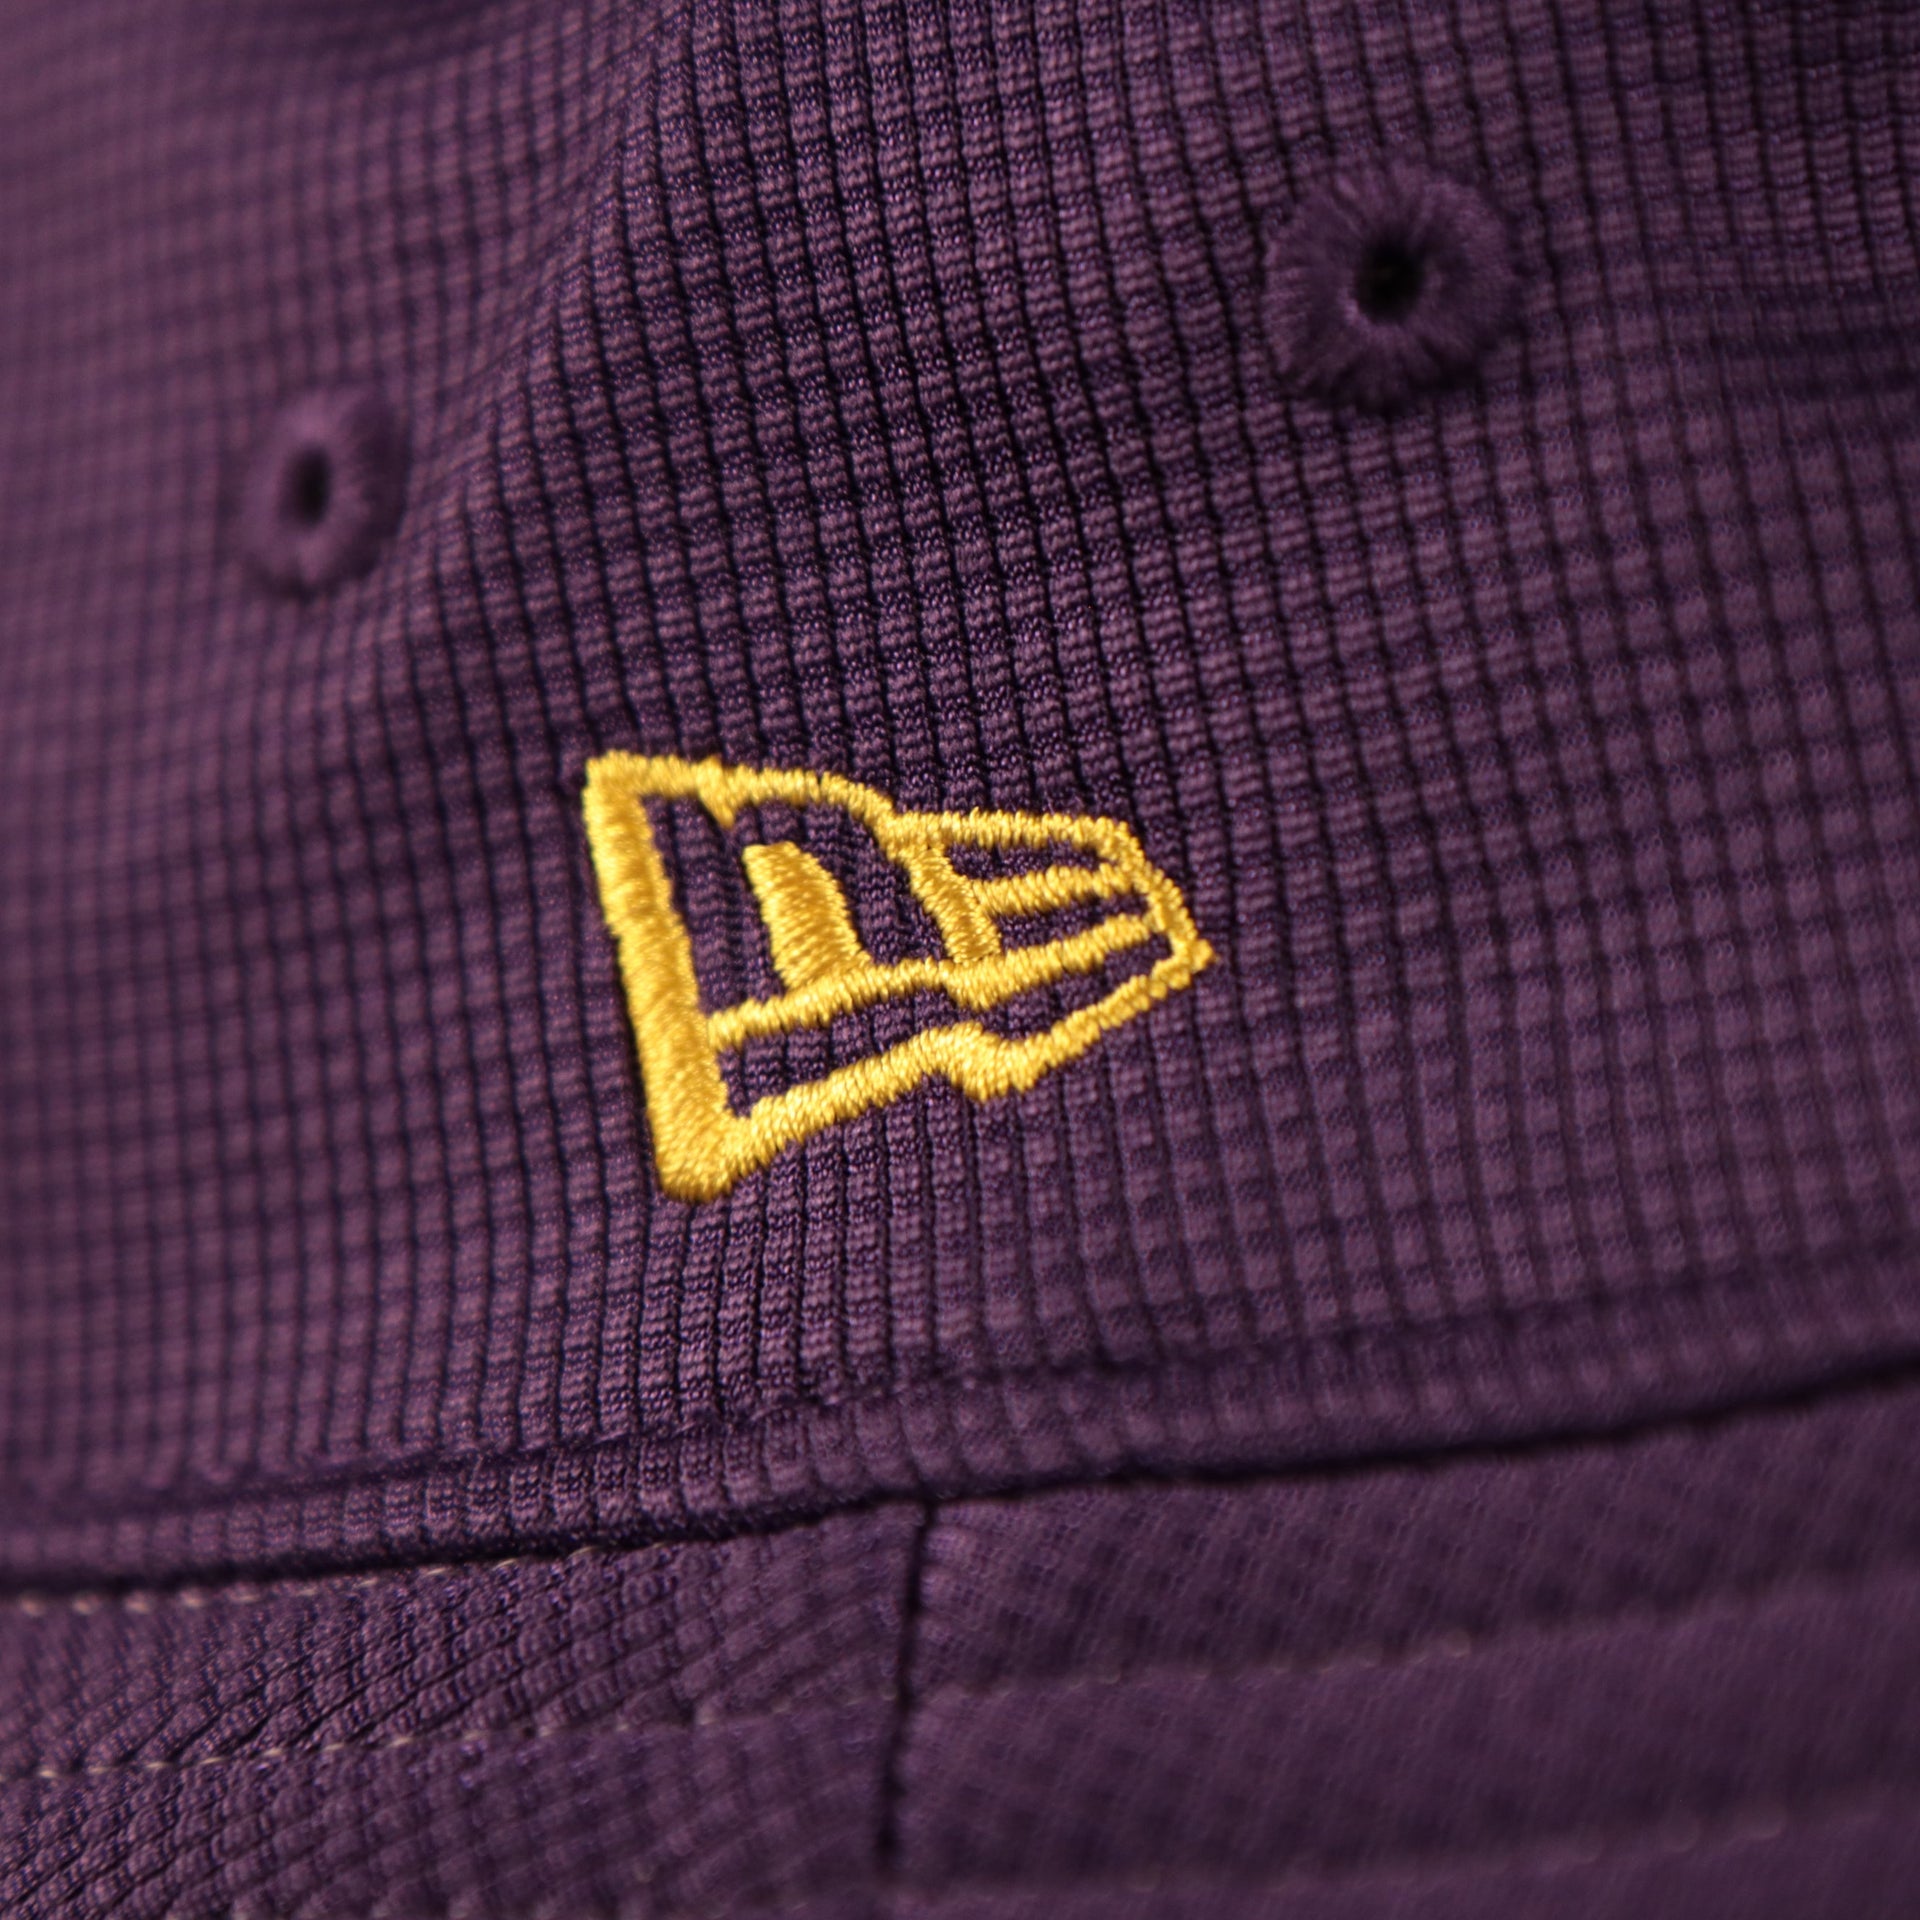 The purple Los Angeles Lakers script brim bucket hat has the patch for the logo of New Era.